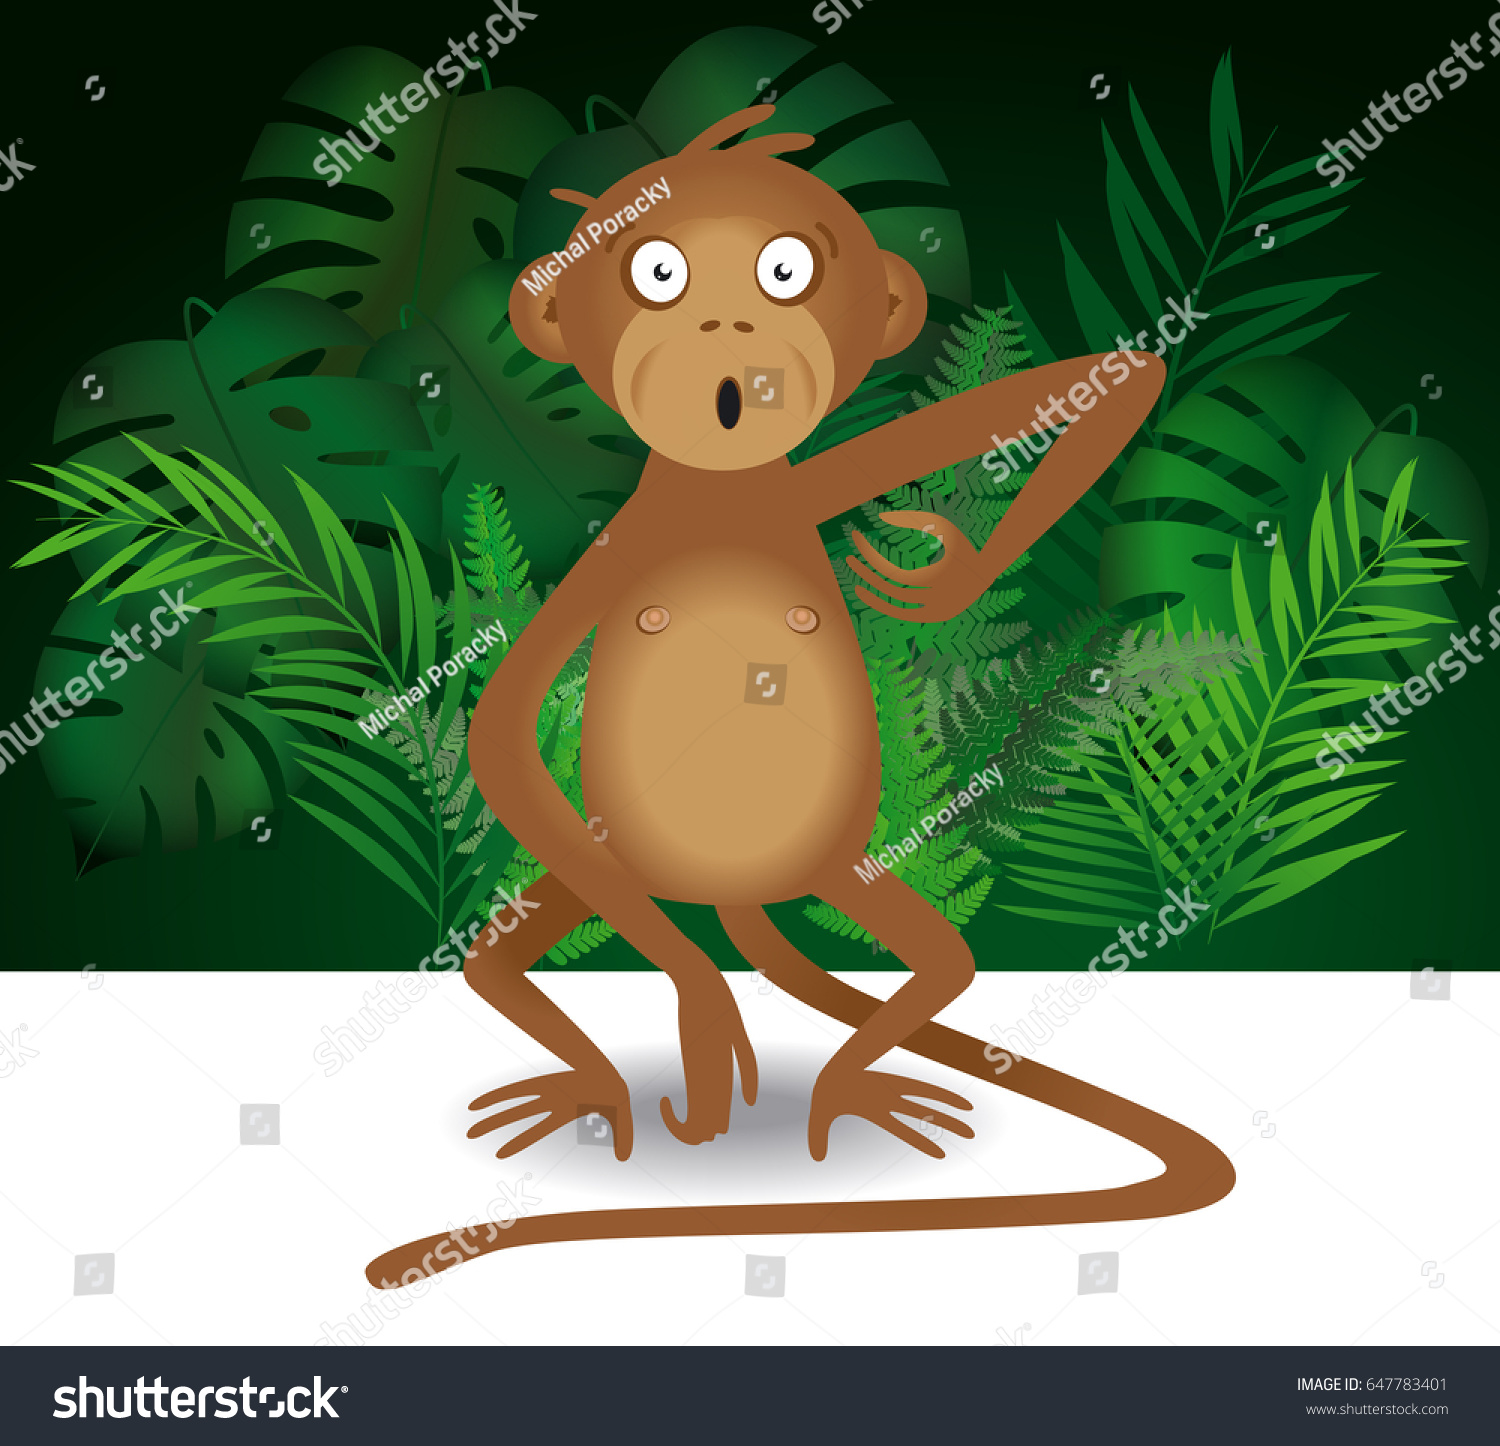 Postea la imagen pedida... - Página 8 Stock-vector-vector-illustration-a-funny-tousled-and-surprised-monkey-scratching-its-armpit-with-a-green-647783401